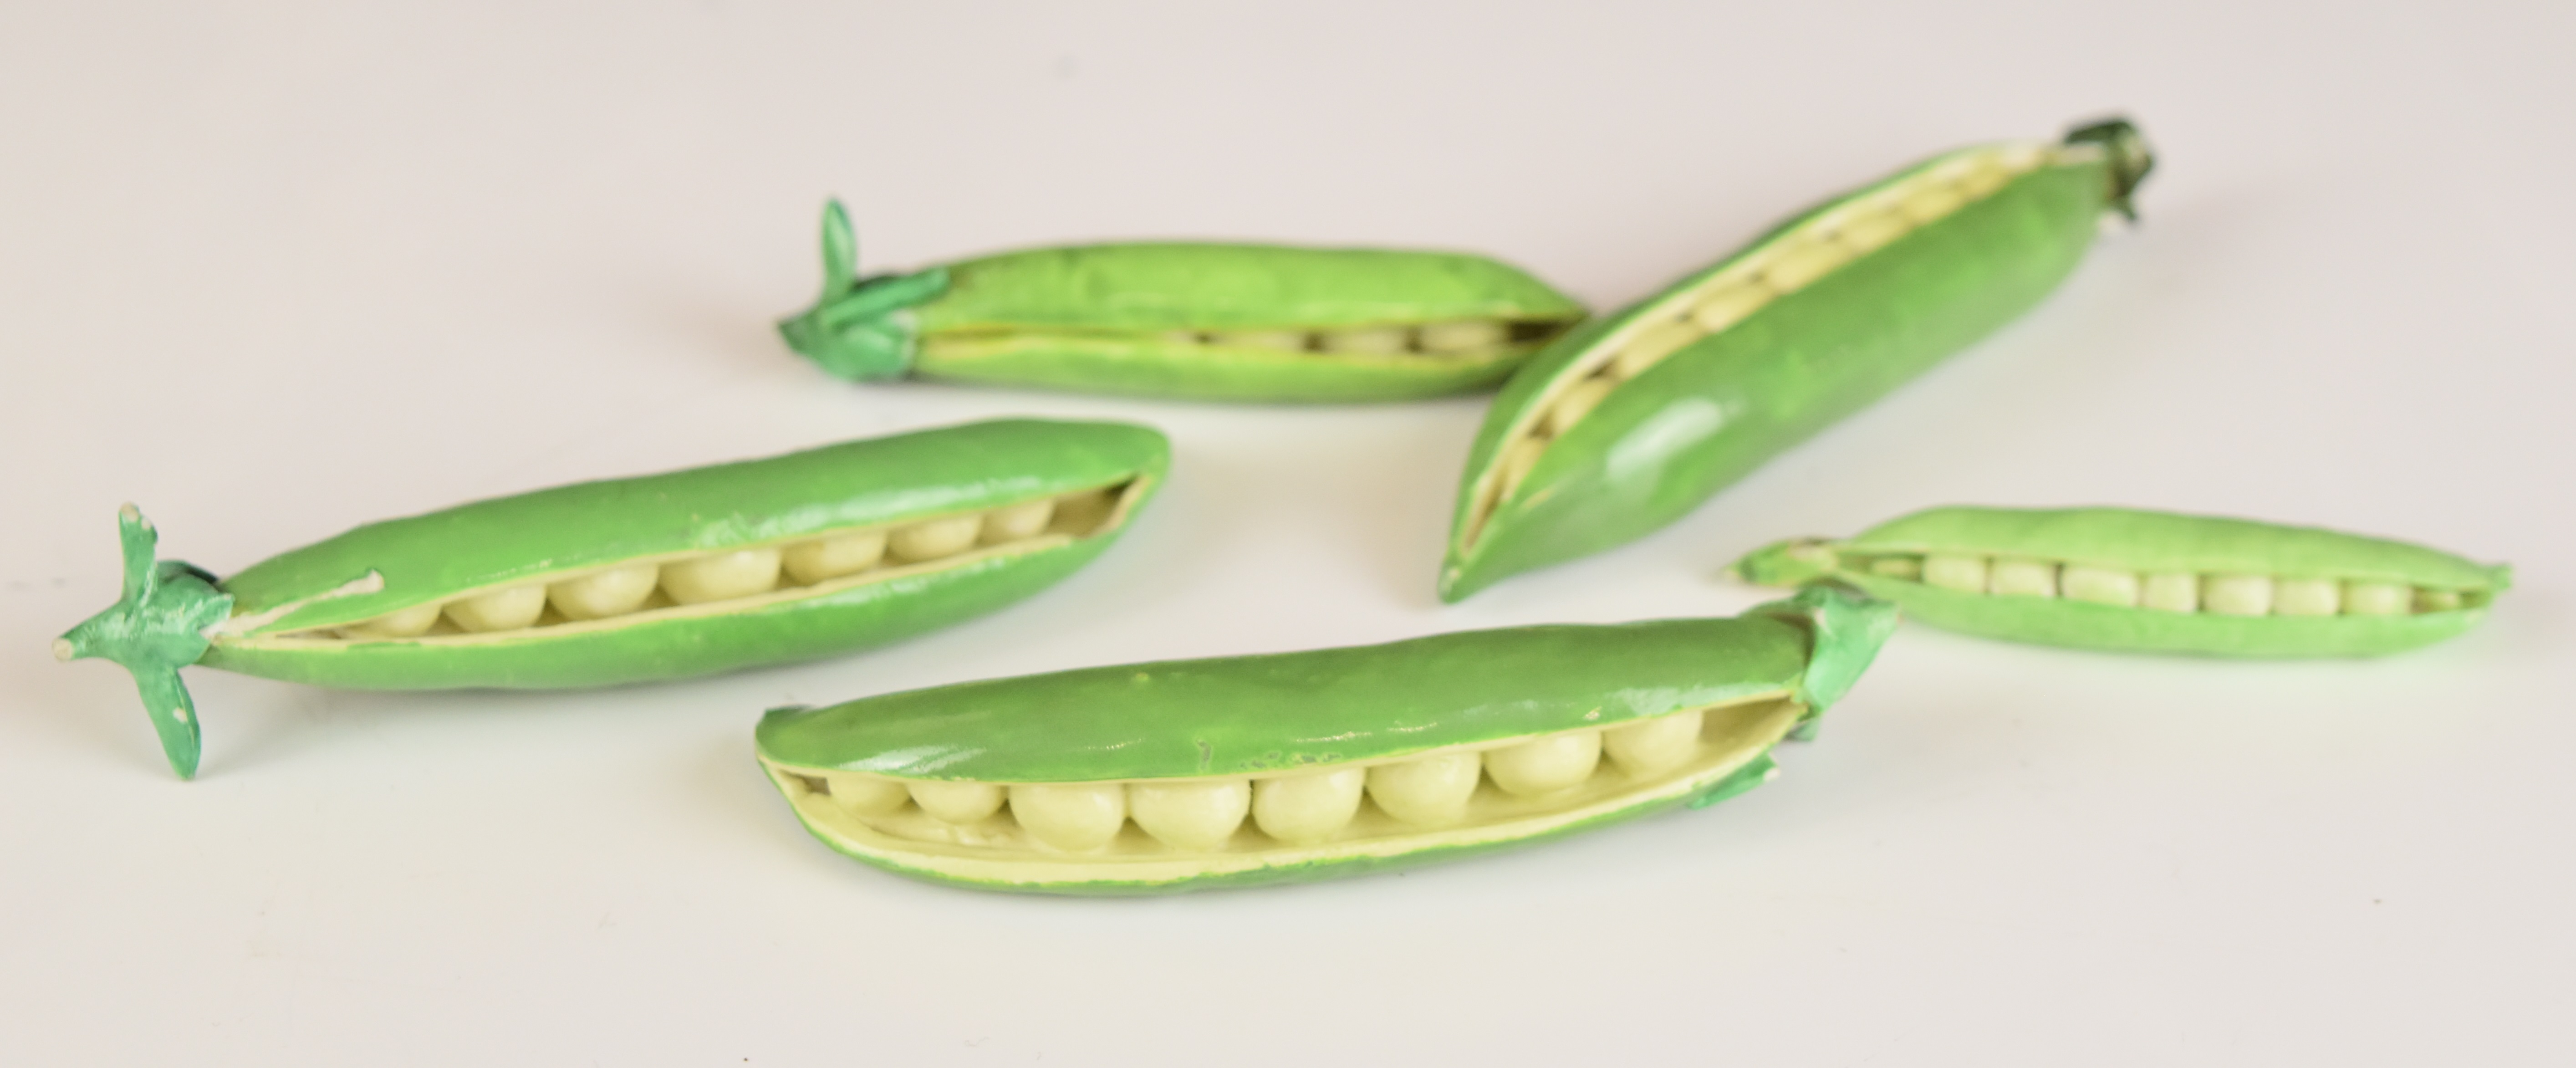 Collection of 19thC Minton / Coalport novelty porcelain pea pods with split pods showing ripe